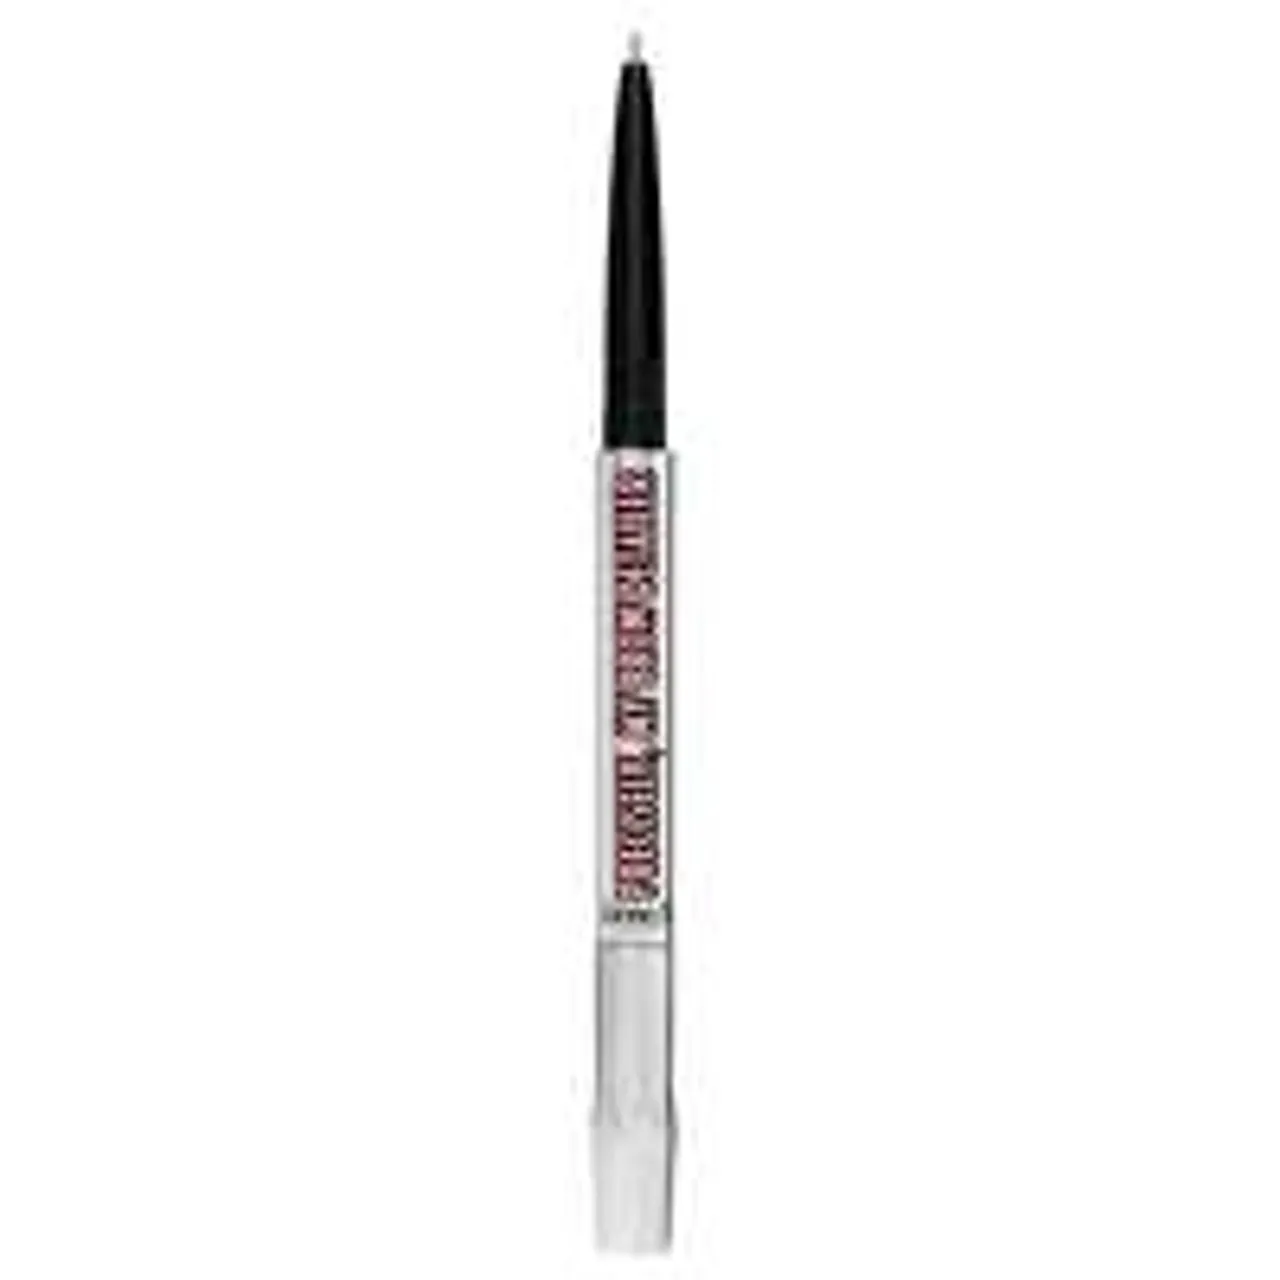 benefit Precisely My Brow Detailer Micro-Fine Precision Pencil 3 Warm Light Brown 0.02g